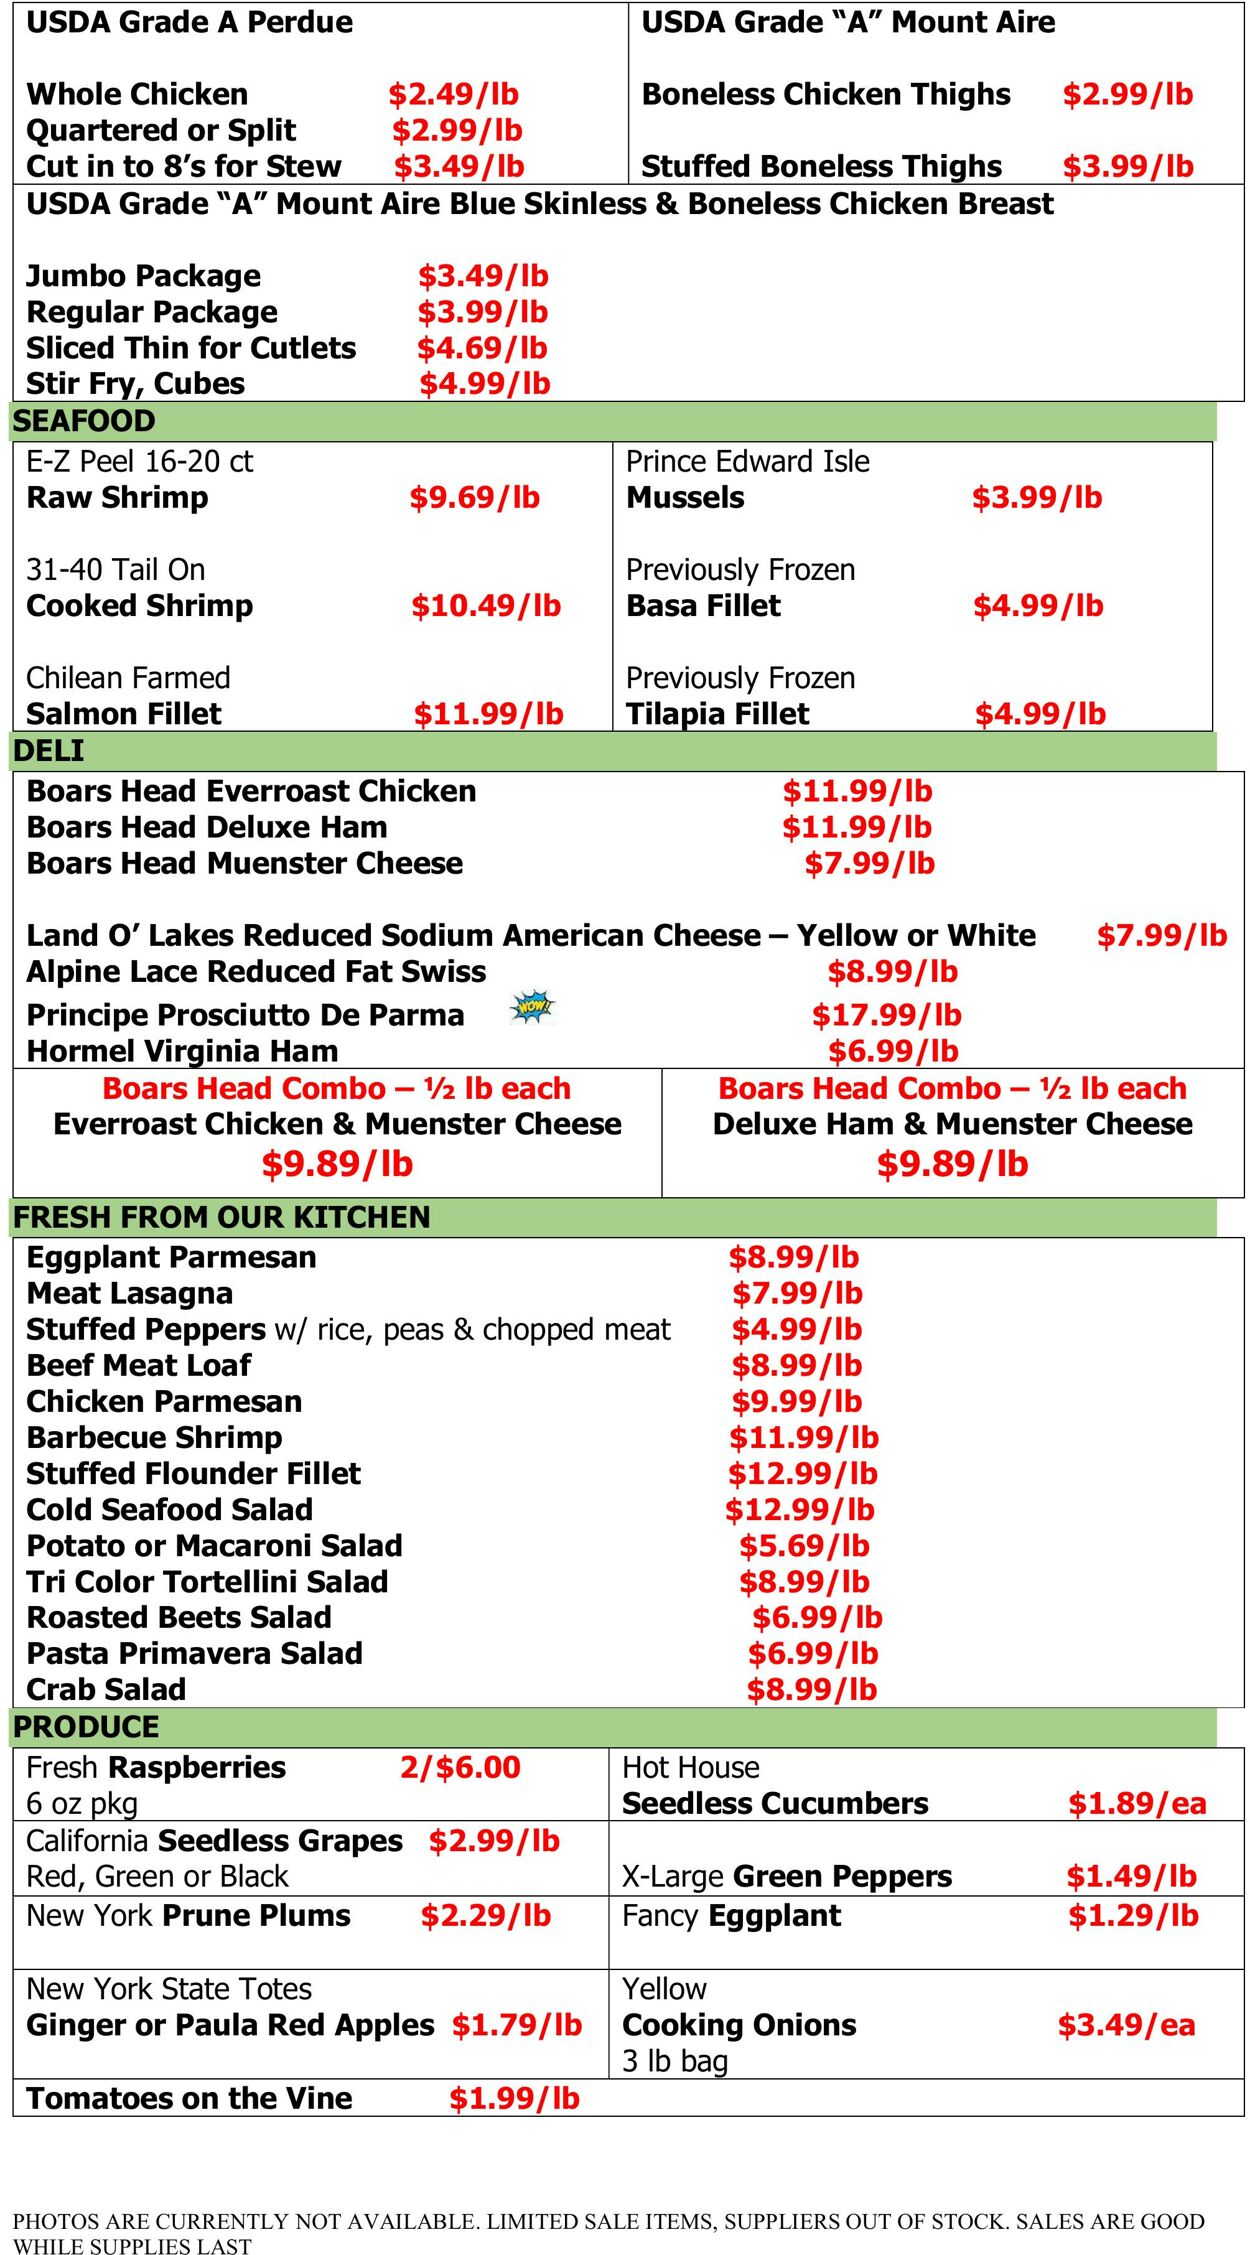 Weekly ad Country Markets of Westchester 09/09/2022 - 09/15/2022